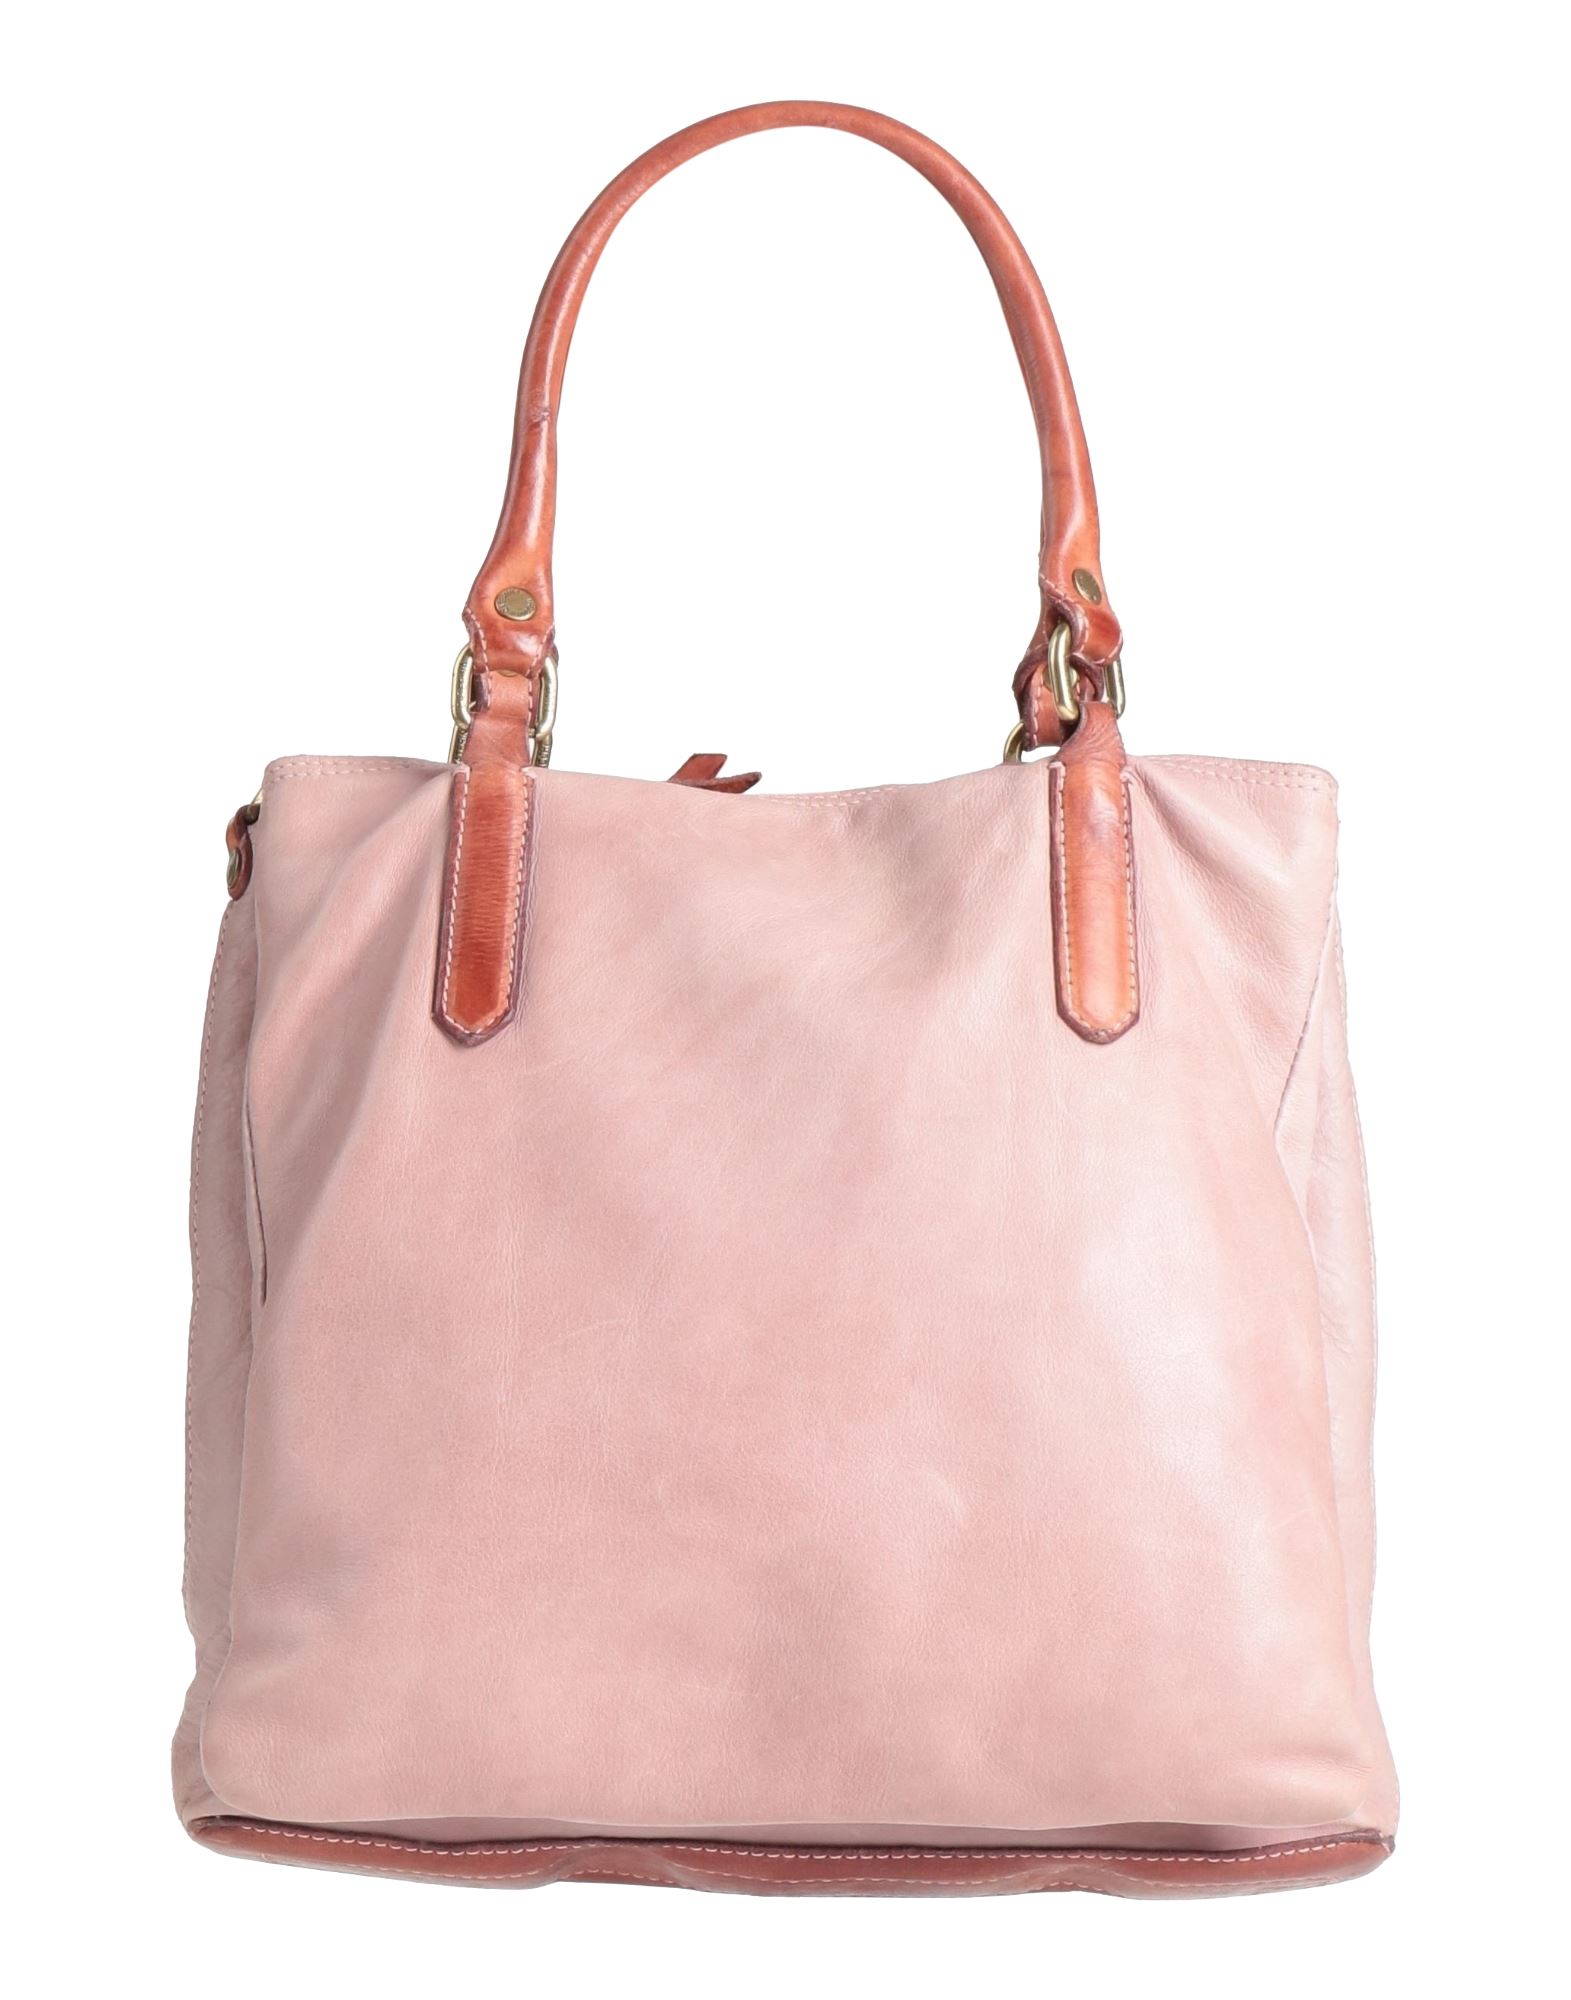 Caterina Lucchi Handbags In Pastel Pink